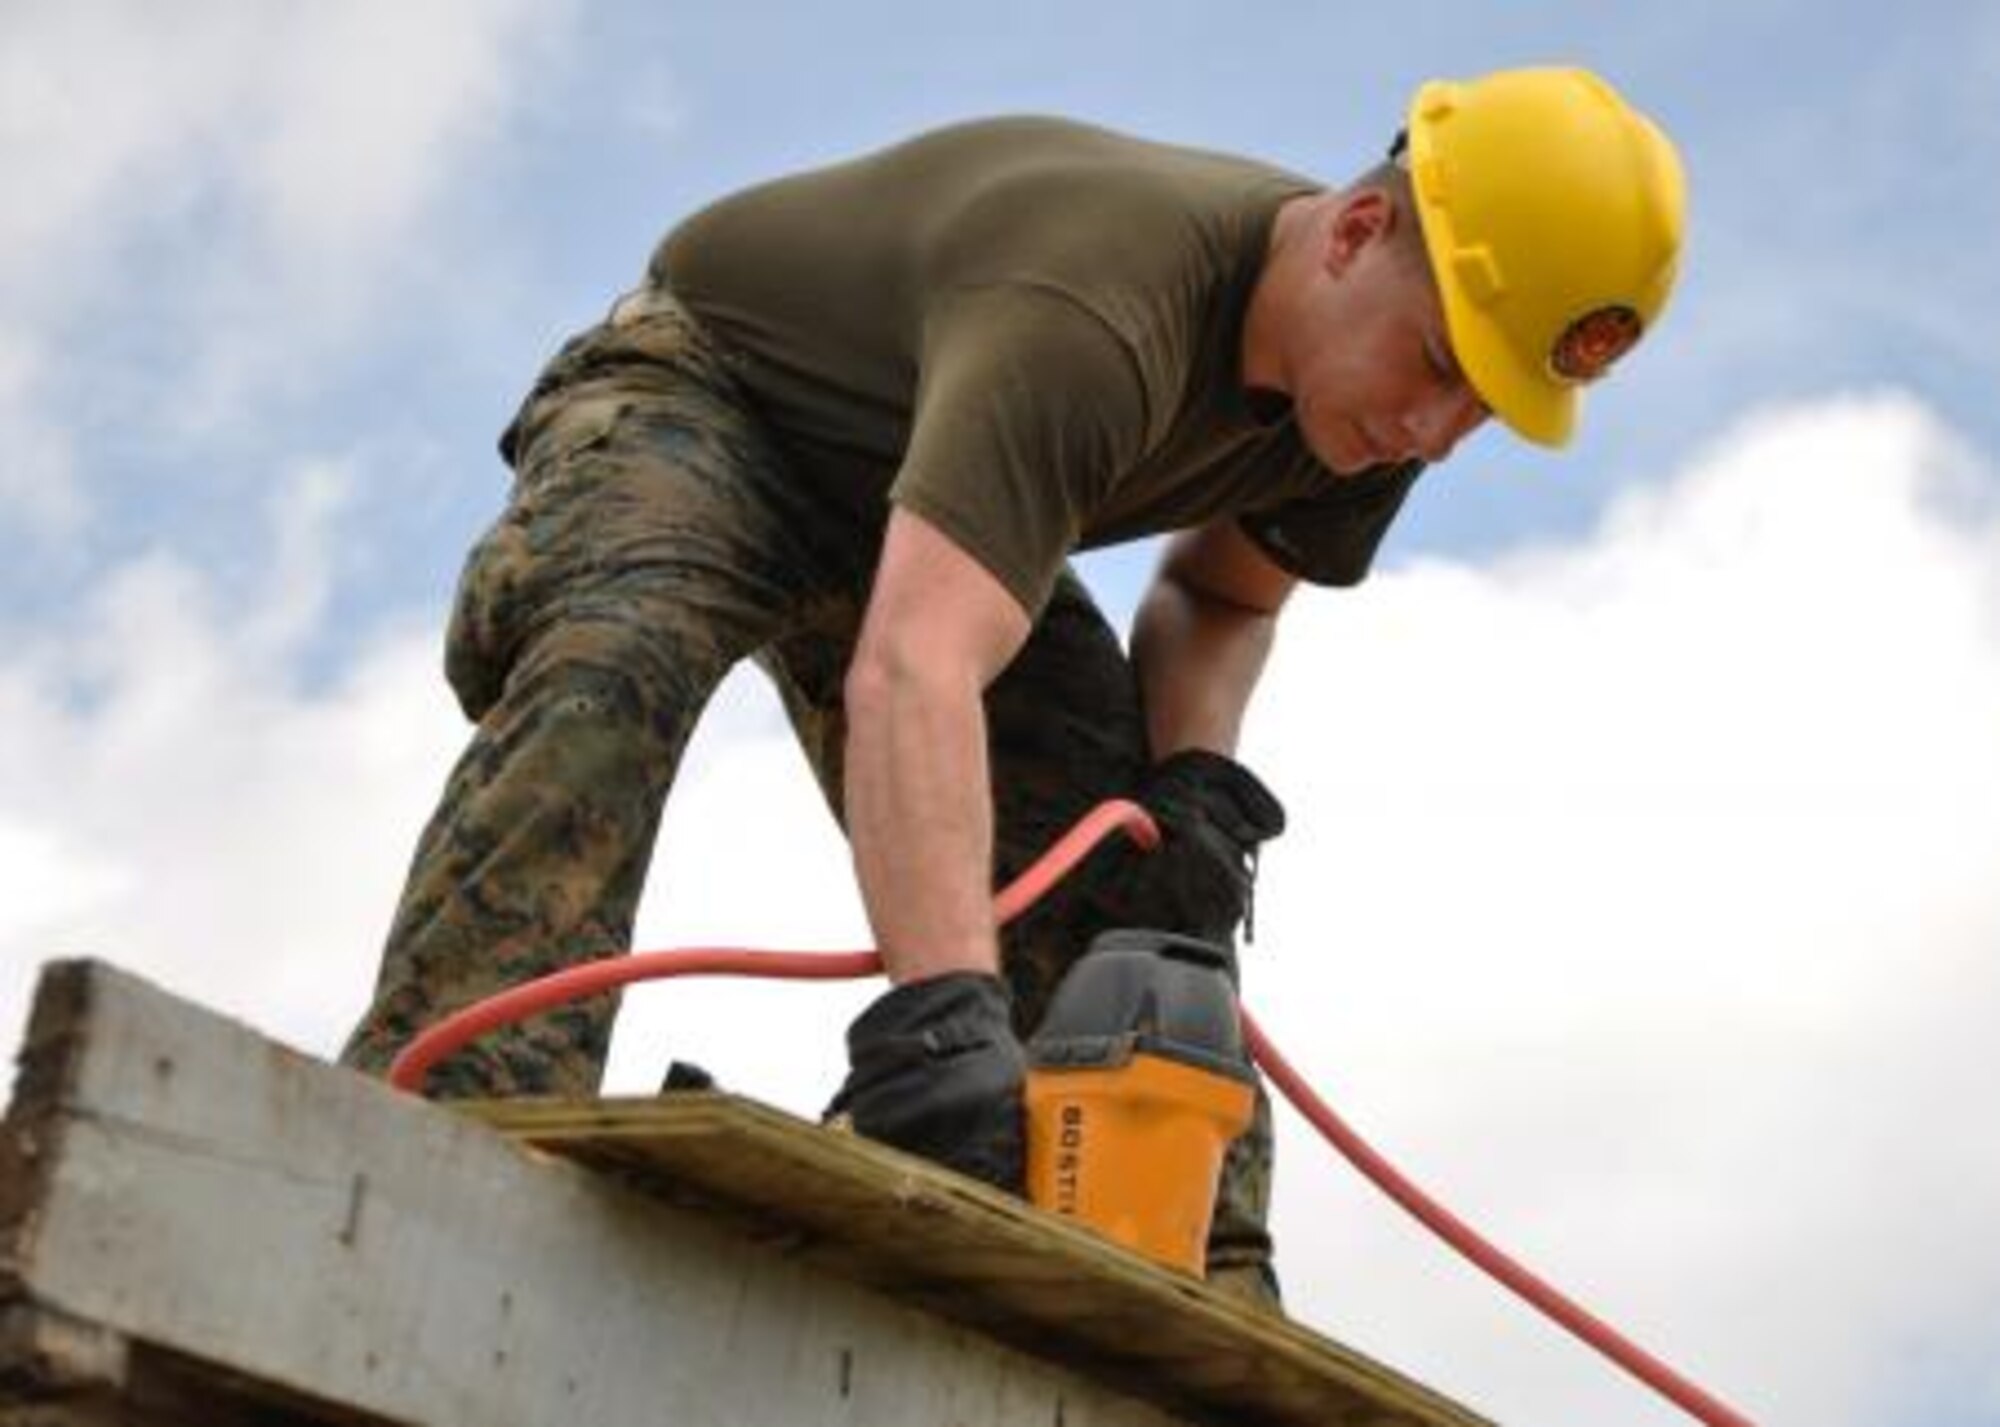 U.S. Marine Corps Cpl. John Yamuni, combat engineer from the Marine Wing Support Squadron 471, uses a nail gun to install roof decking to repair a roof at Hattieville Government Pre-School June 4, 2013, as part of an exercise called New Horizons. Using excess building materials, the civil engineers plan to repair the leaky roof. Civil Engineers from both the U.S. and Belize are constructing various structures at schools throughout Belize as part of an exercise called New Horizons. Building these facilities will support further education for the children of the country and provide valuable training for U.S. and Belizean service members. (U.S. Air Force photo/Capt. Holly Hess)
